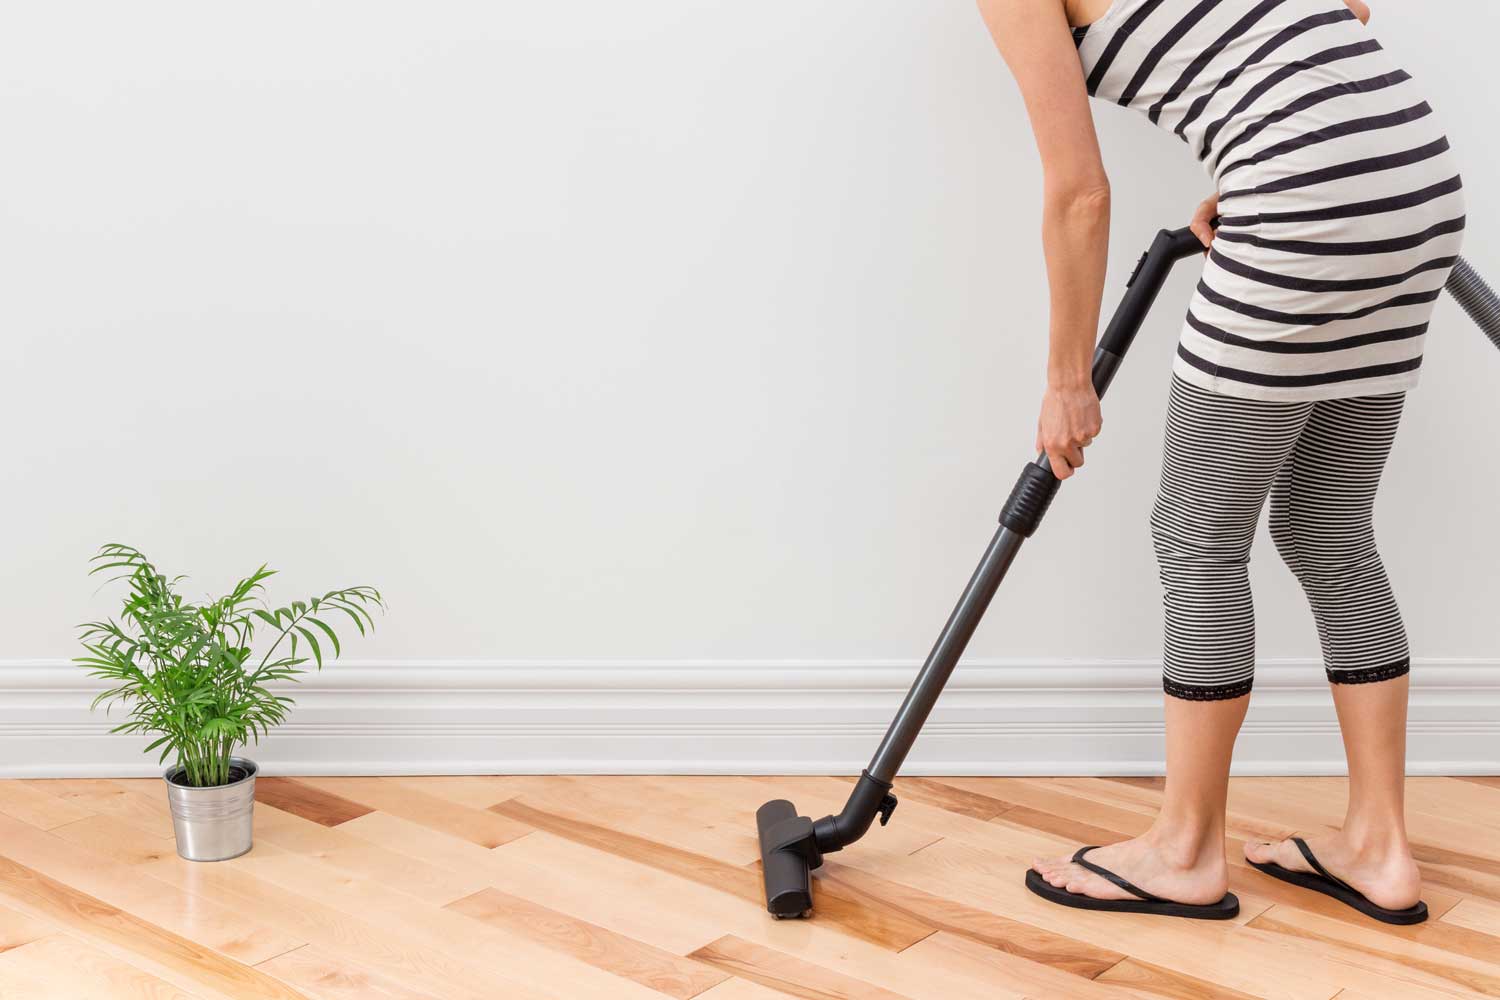 Regulary vacuum or sweep floors to remove dirt and keep your home floors looking amazing - tips from Footprints Floors in Durham / Chapel Hill.